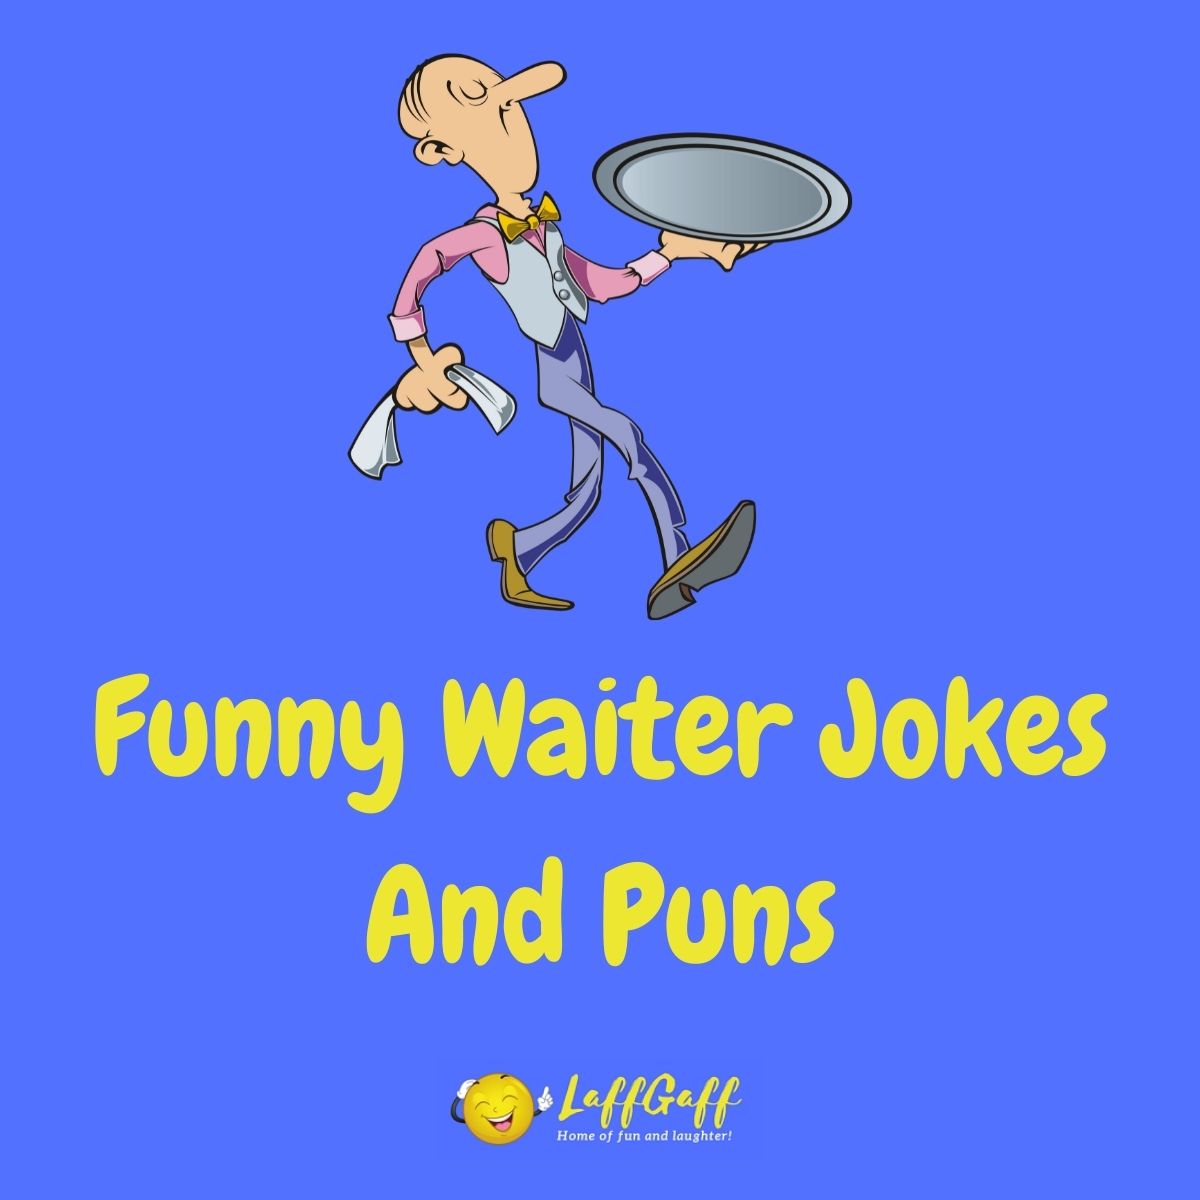 Featured image for a page of funny waiter jokes and puns.